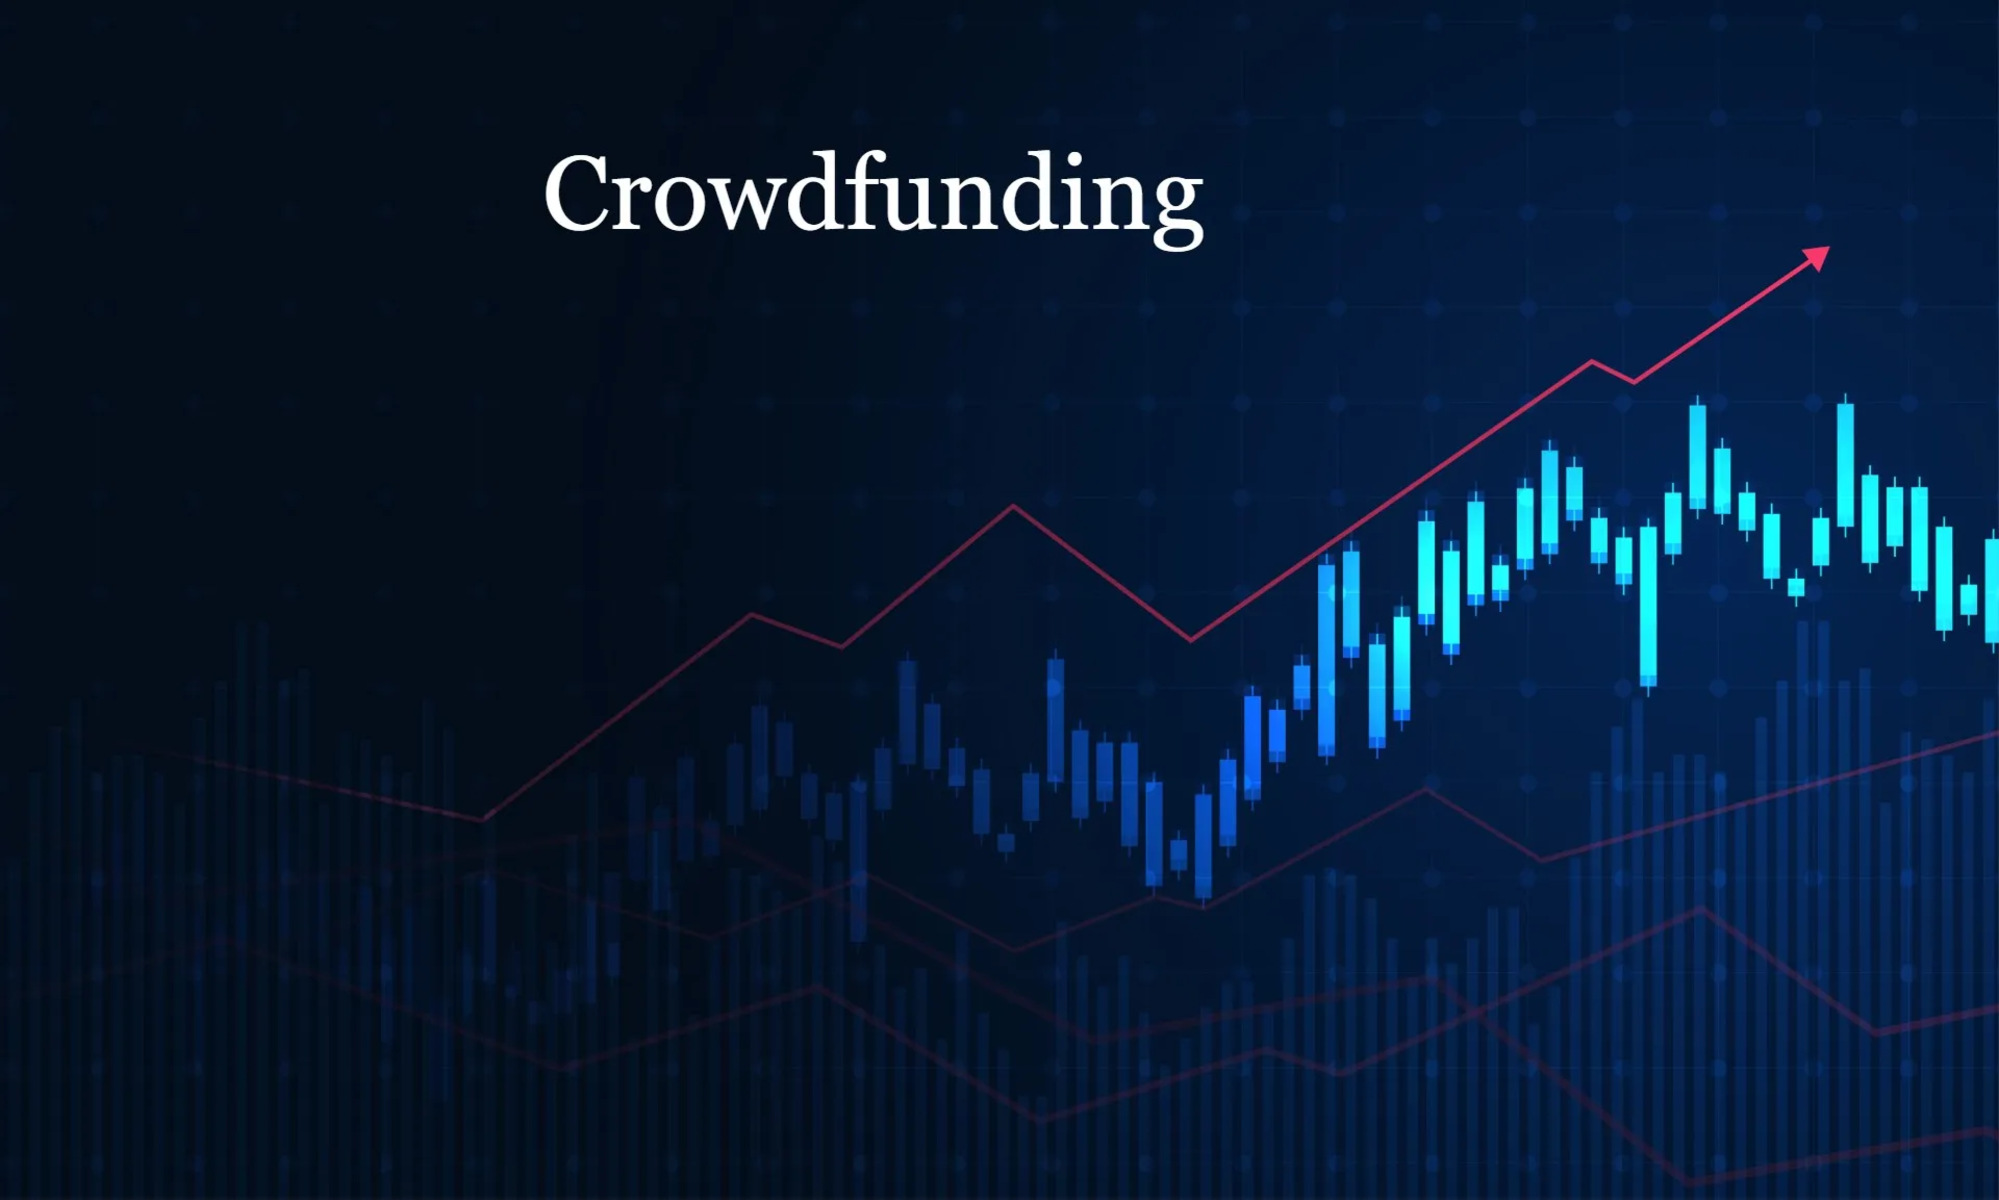 What Are The Disadvantages Of Crowdfunding?